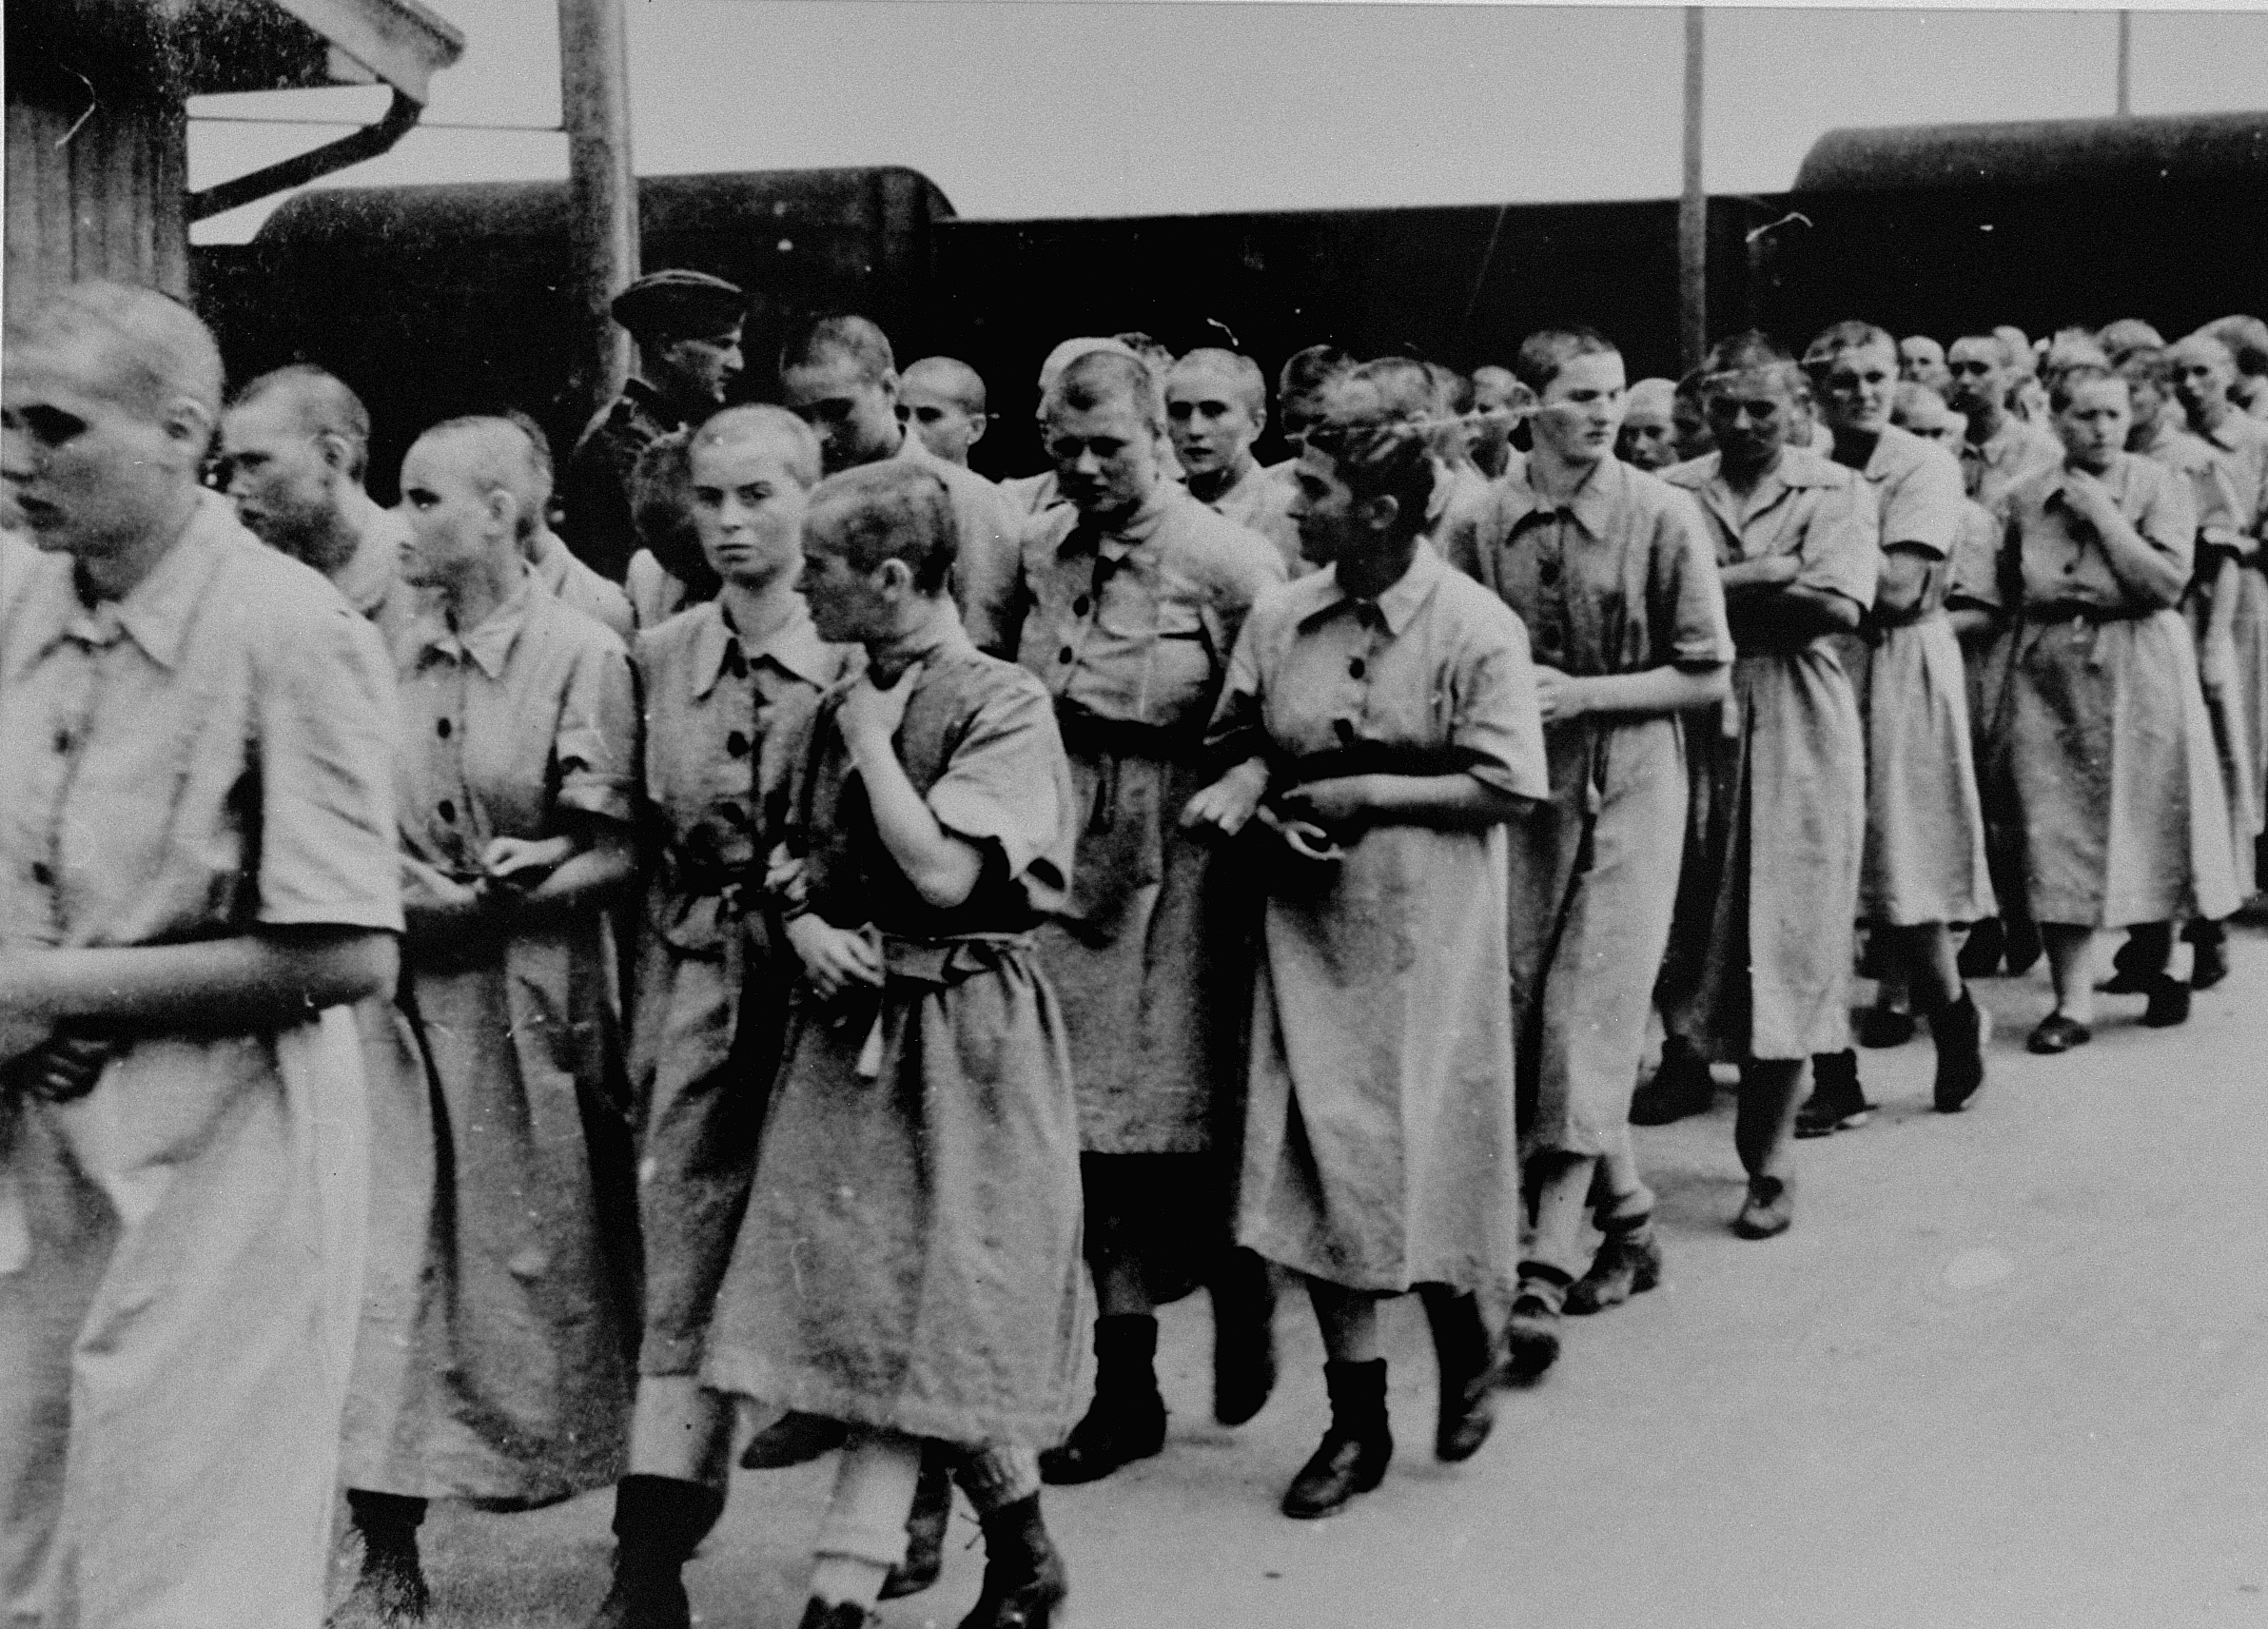 Jewish female forced laborers from Subcarpathian Rus march toward their barracks after disinfection and headshaving at the Auschwitz-Birkenau concentration and extermination camp in Nazi-occupied Poland, May 1944. Photo credit: USHMM #77370